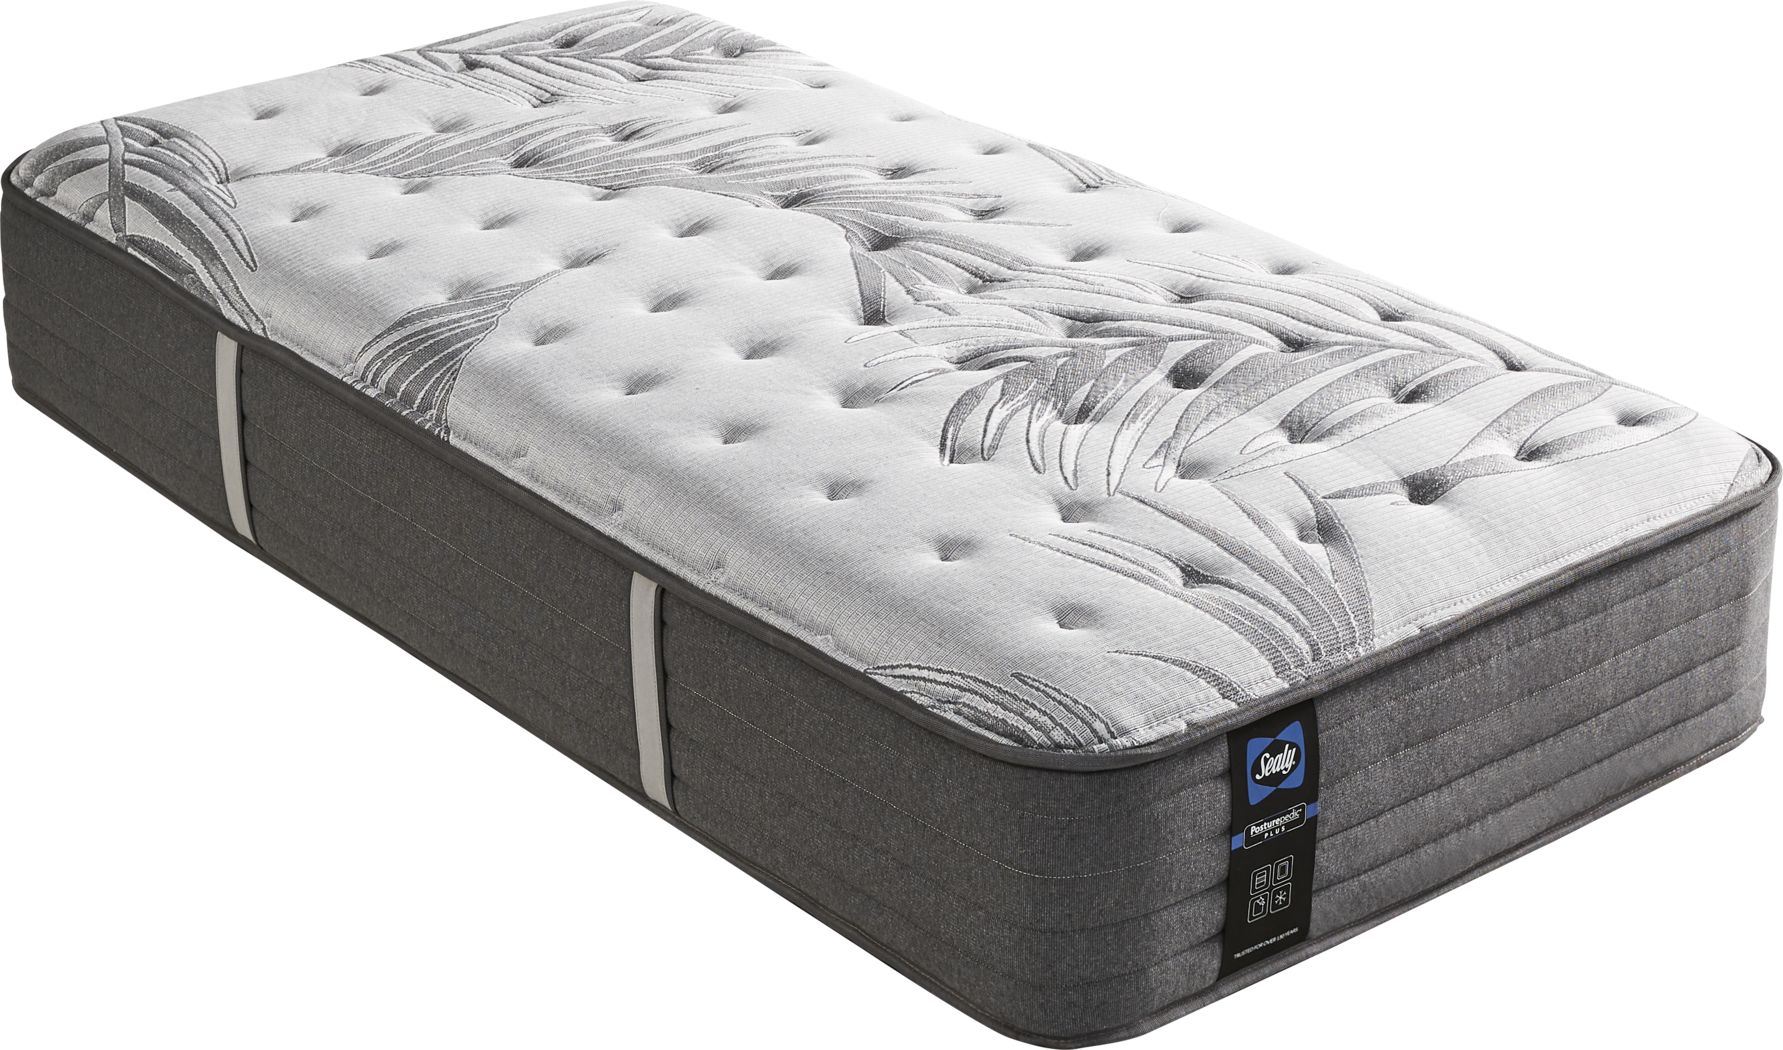 mattresses for sale in florence alabama